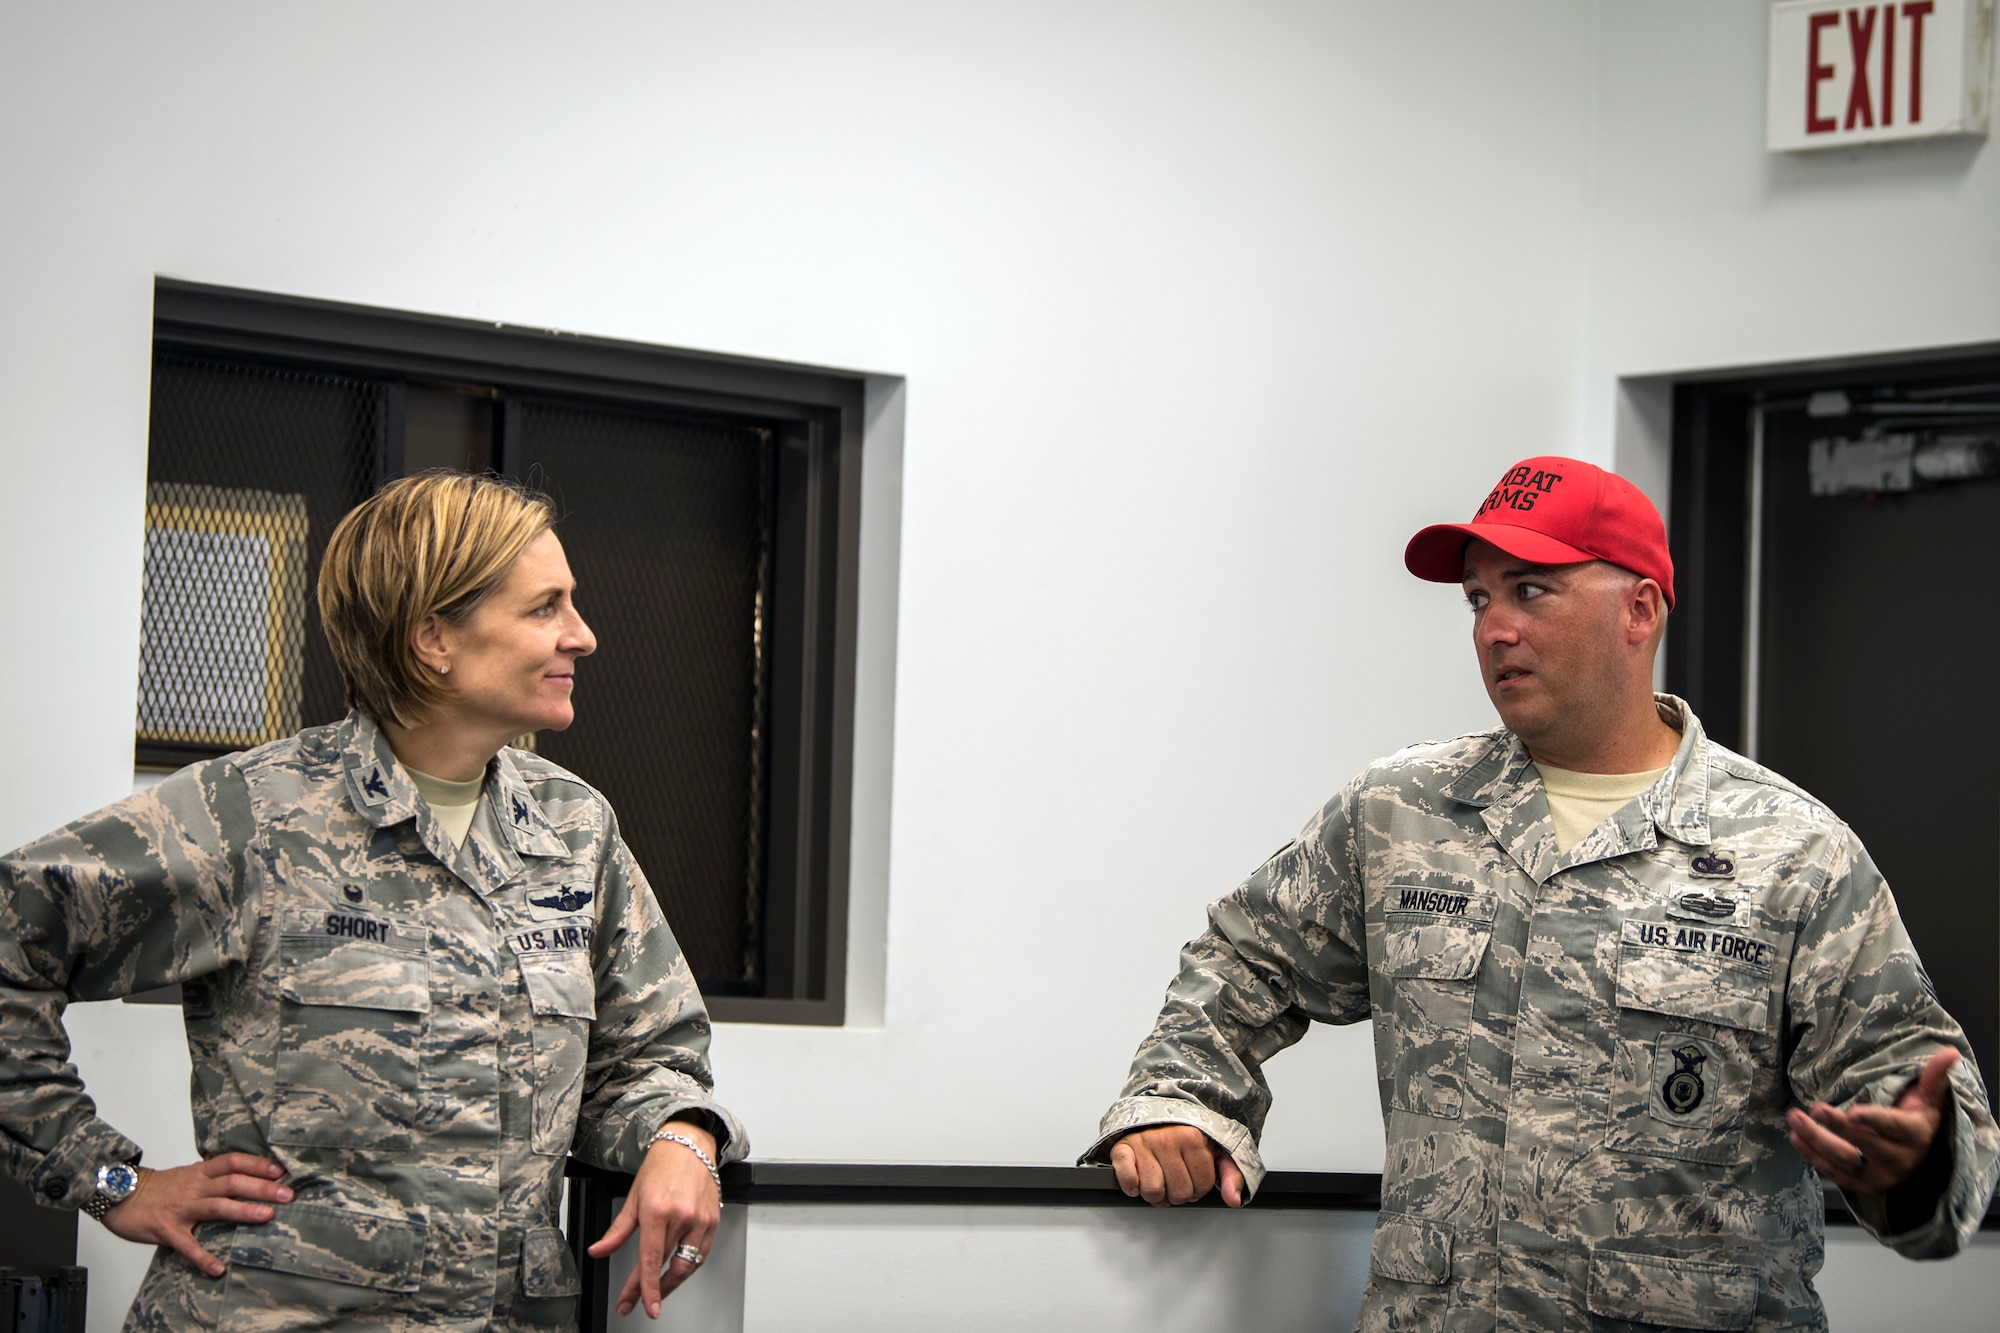 Col. Jennifer Short, 23d Wing commander, listens to a briefing from Tech. Sgt. Brandon Mansour, 23d Security Forces Squadron combat arms instructor, during an immersion tour, May 21, 2018, at Moody Air Force Base, Ga. Short toured the 23d Mission Support Group (MSG) to gain a better understanding of their overall mission, capabilities, and comprehensive duties. Short was able to meet and interact with Airmen from the combat arms training and maintenance as well as the chemical, biological, radiological and nuclear defense sections of the MSG. (U.S. Air Force photo by Airman 1st Class Eugene Oliver)